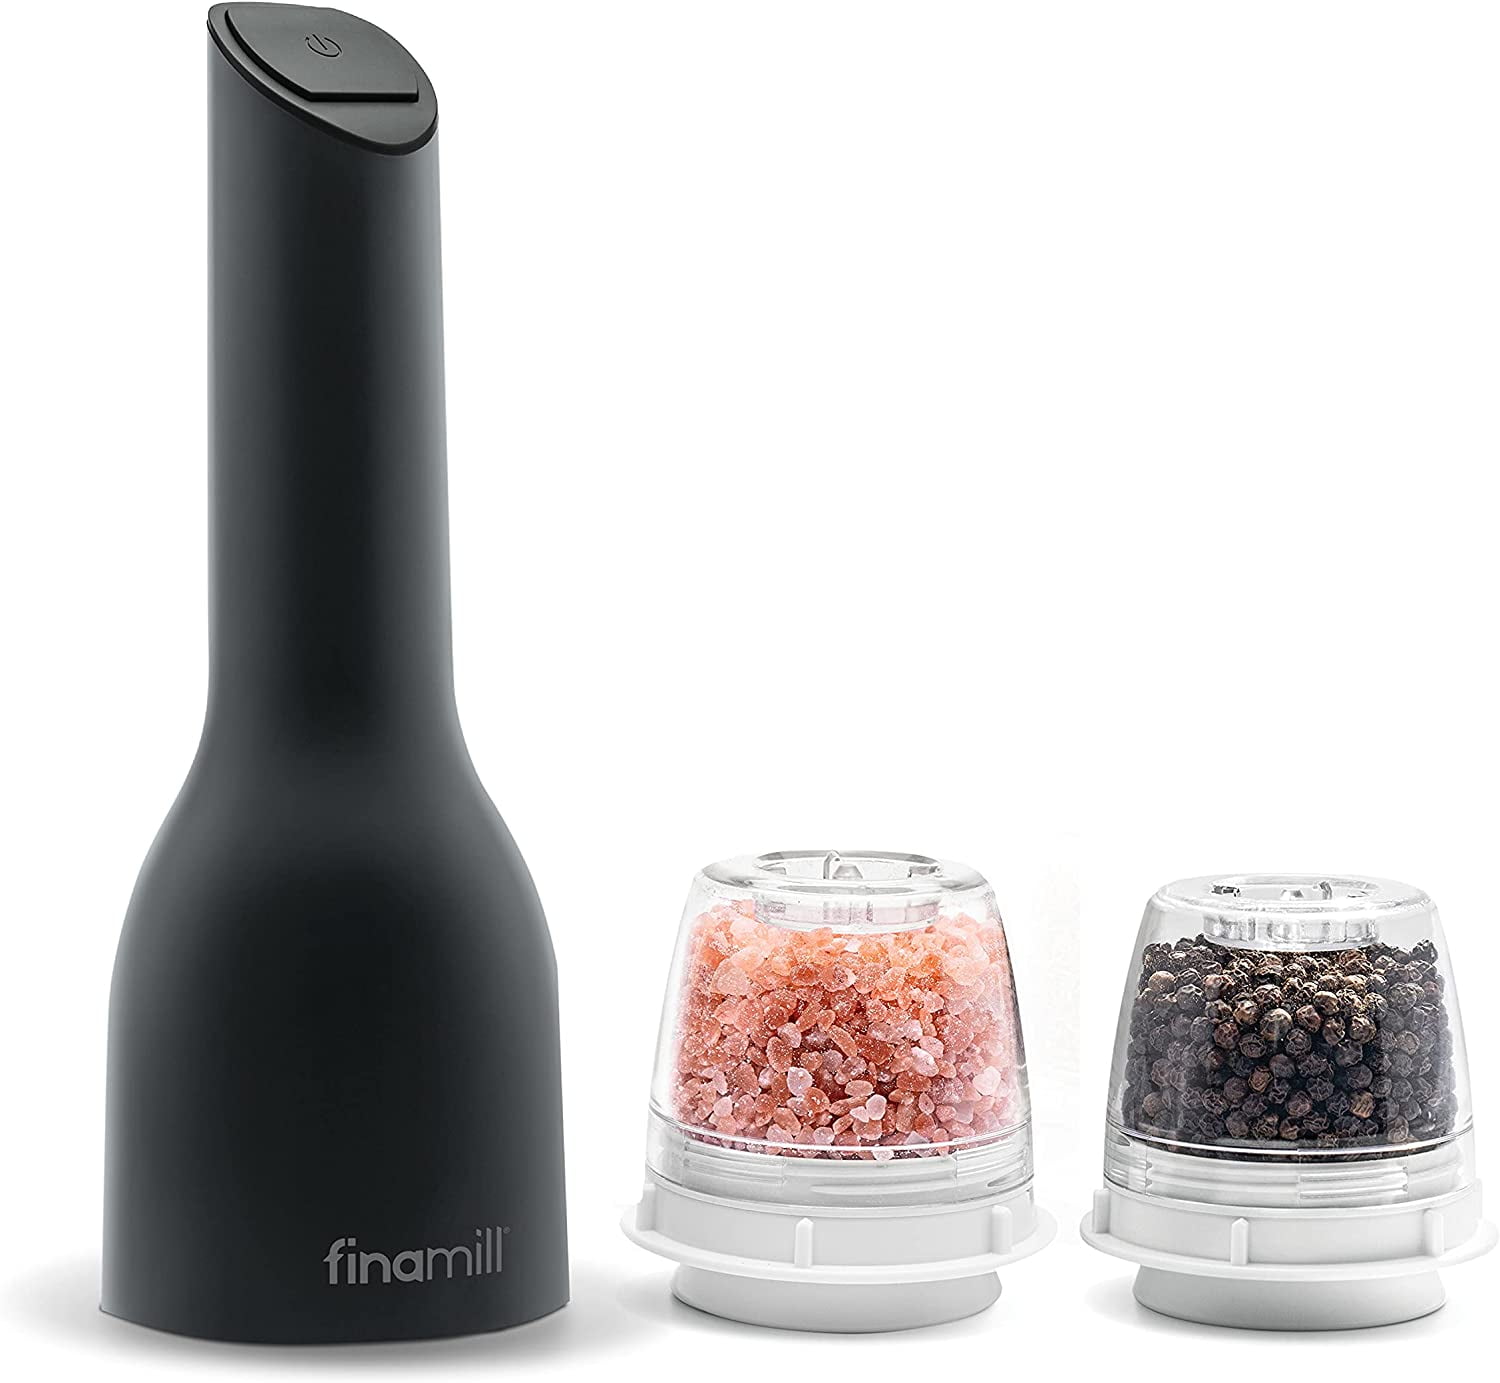 FinaMill - Award Winning Battery Operated Spice Grinder - Adjustable  Coarseness, Durable Ceramic Grinding Elements, One Touch Operation, LED  Light, Easy to Refill, includes 2 Quick-Chan 